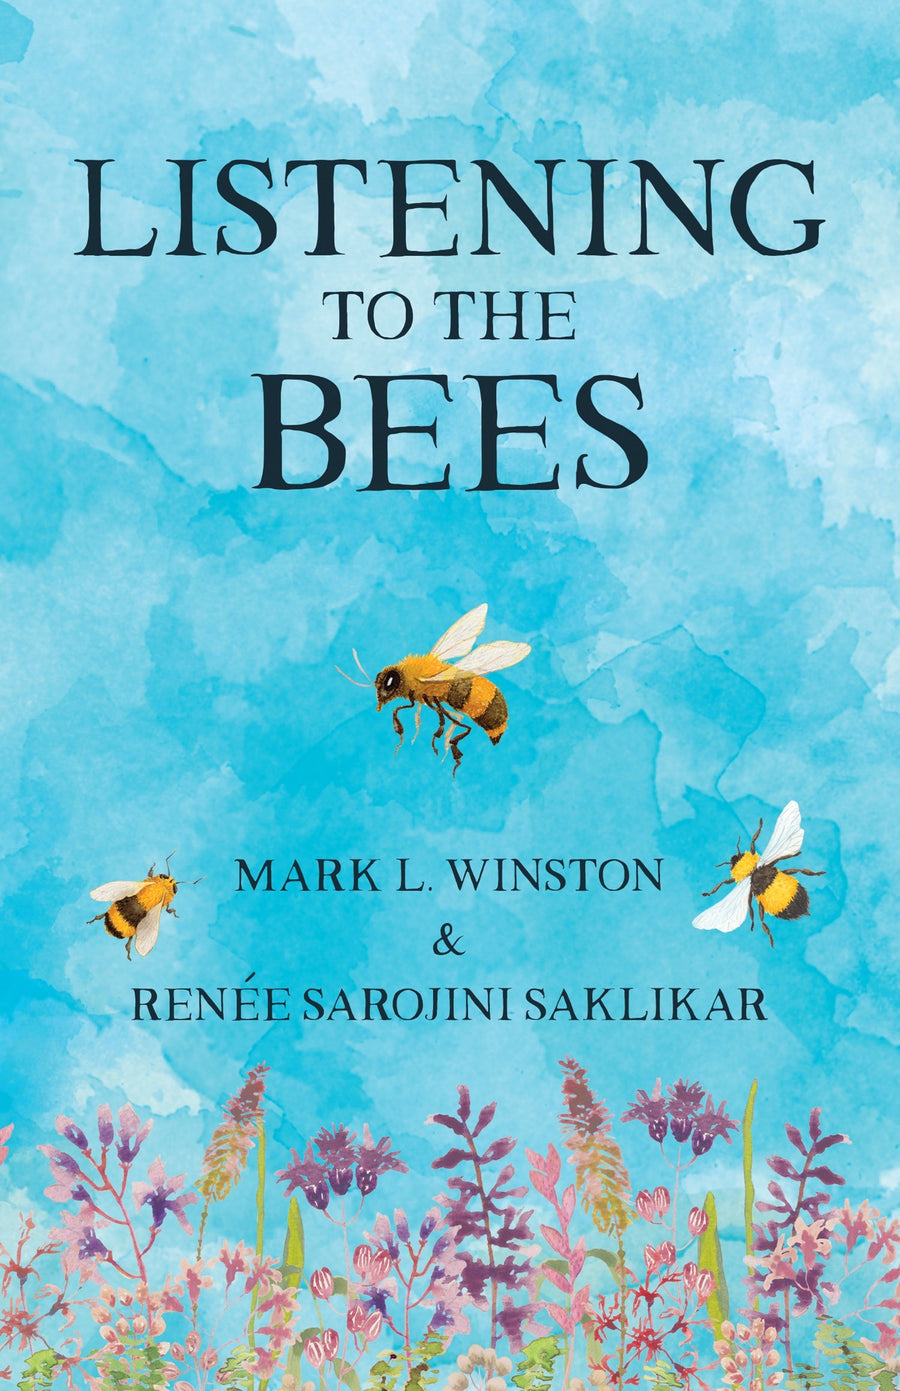 Listening to the Bees